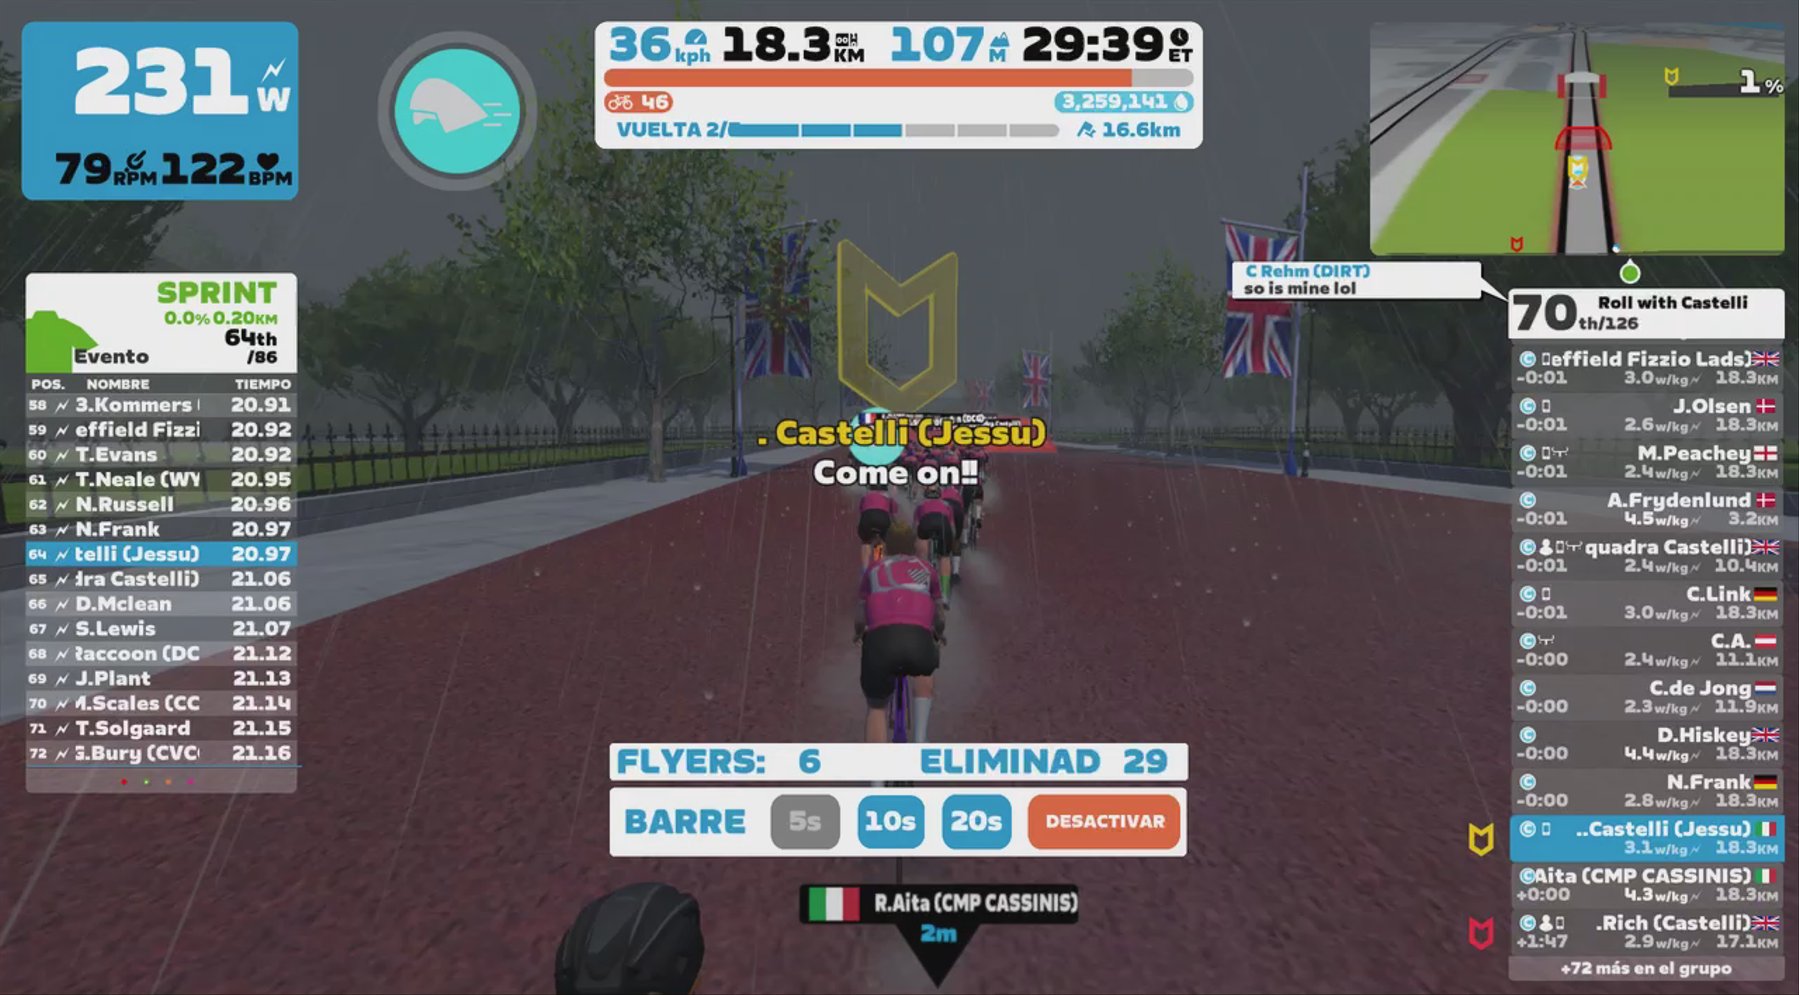 Zwift - Group Ride: Roll with Castelli  (C) on Classique Reverse in London